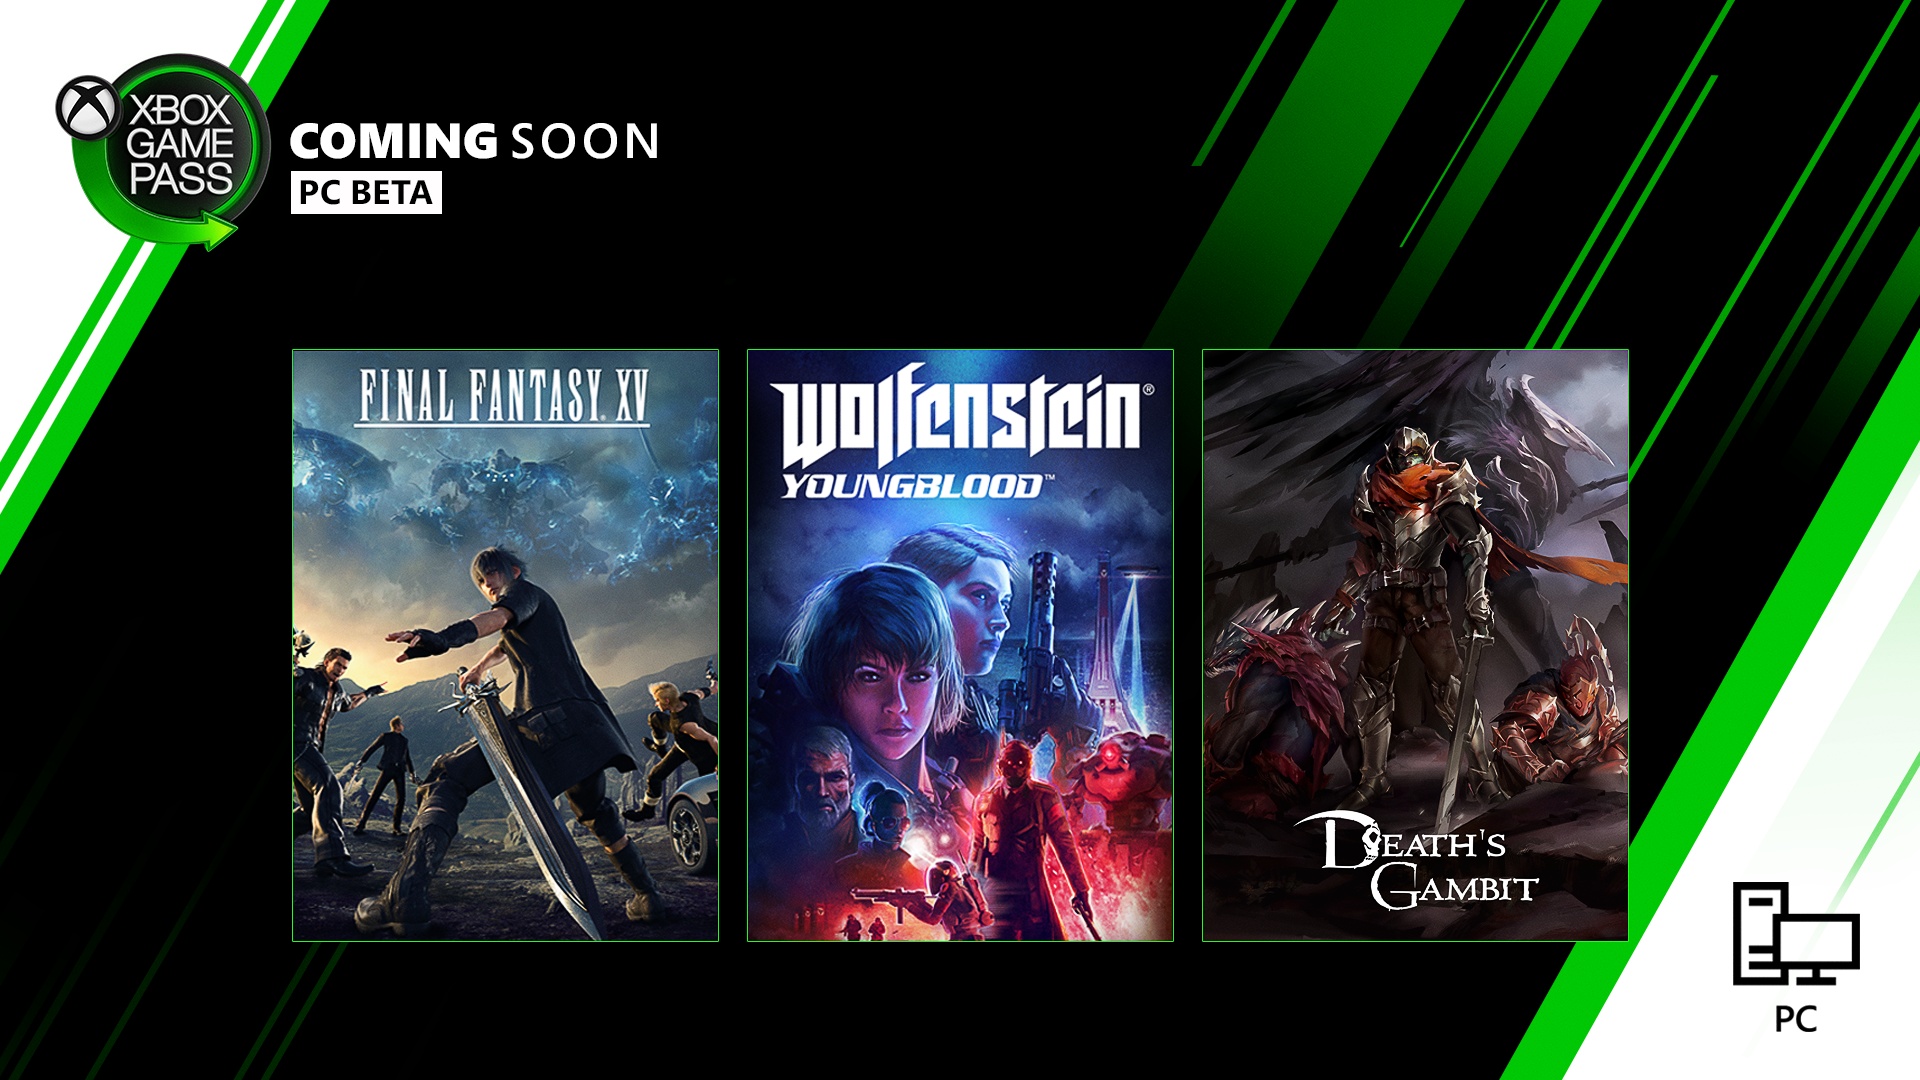 Xbox Game Pass for PC - February 2020